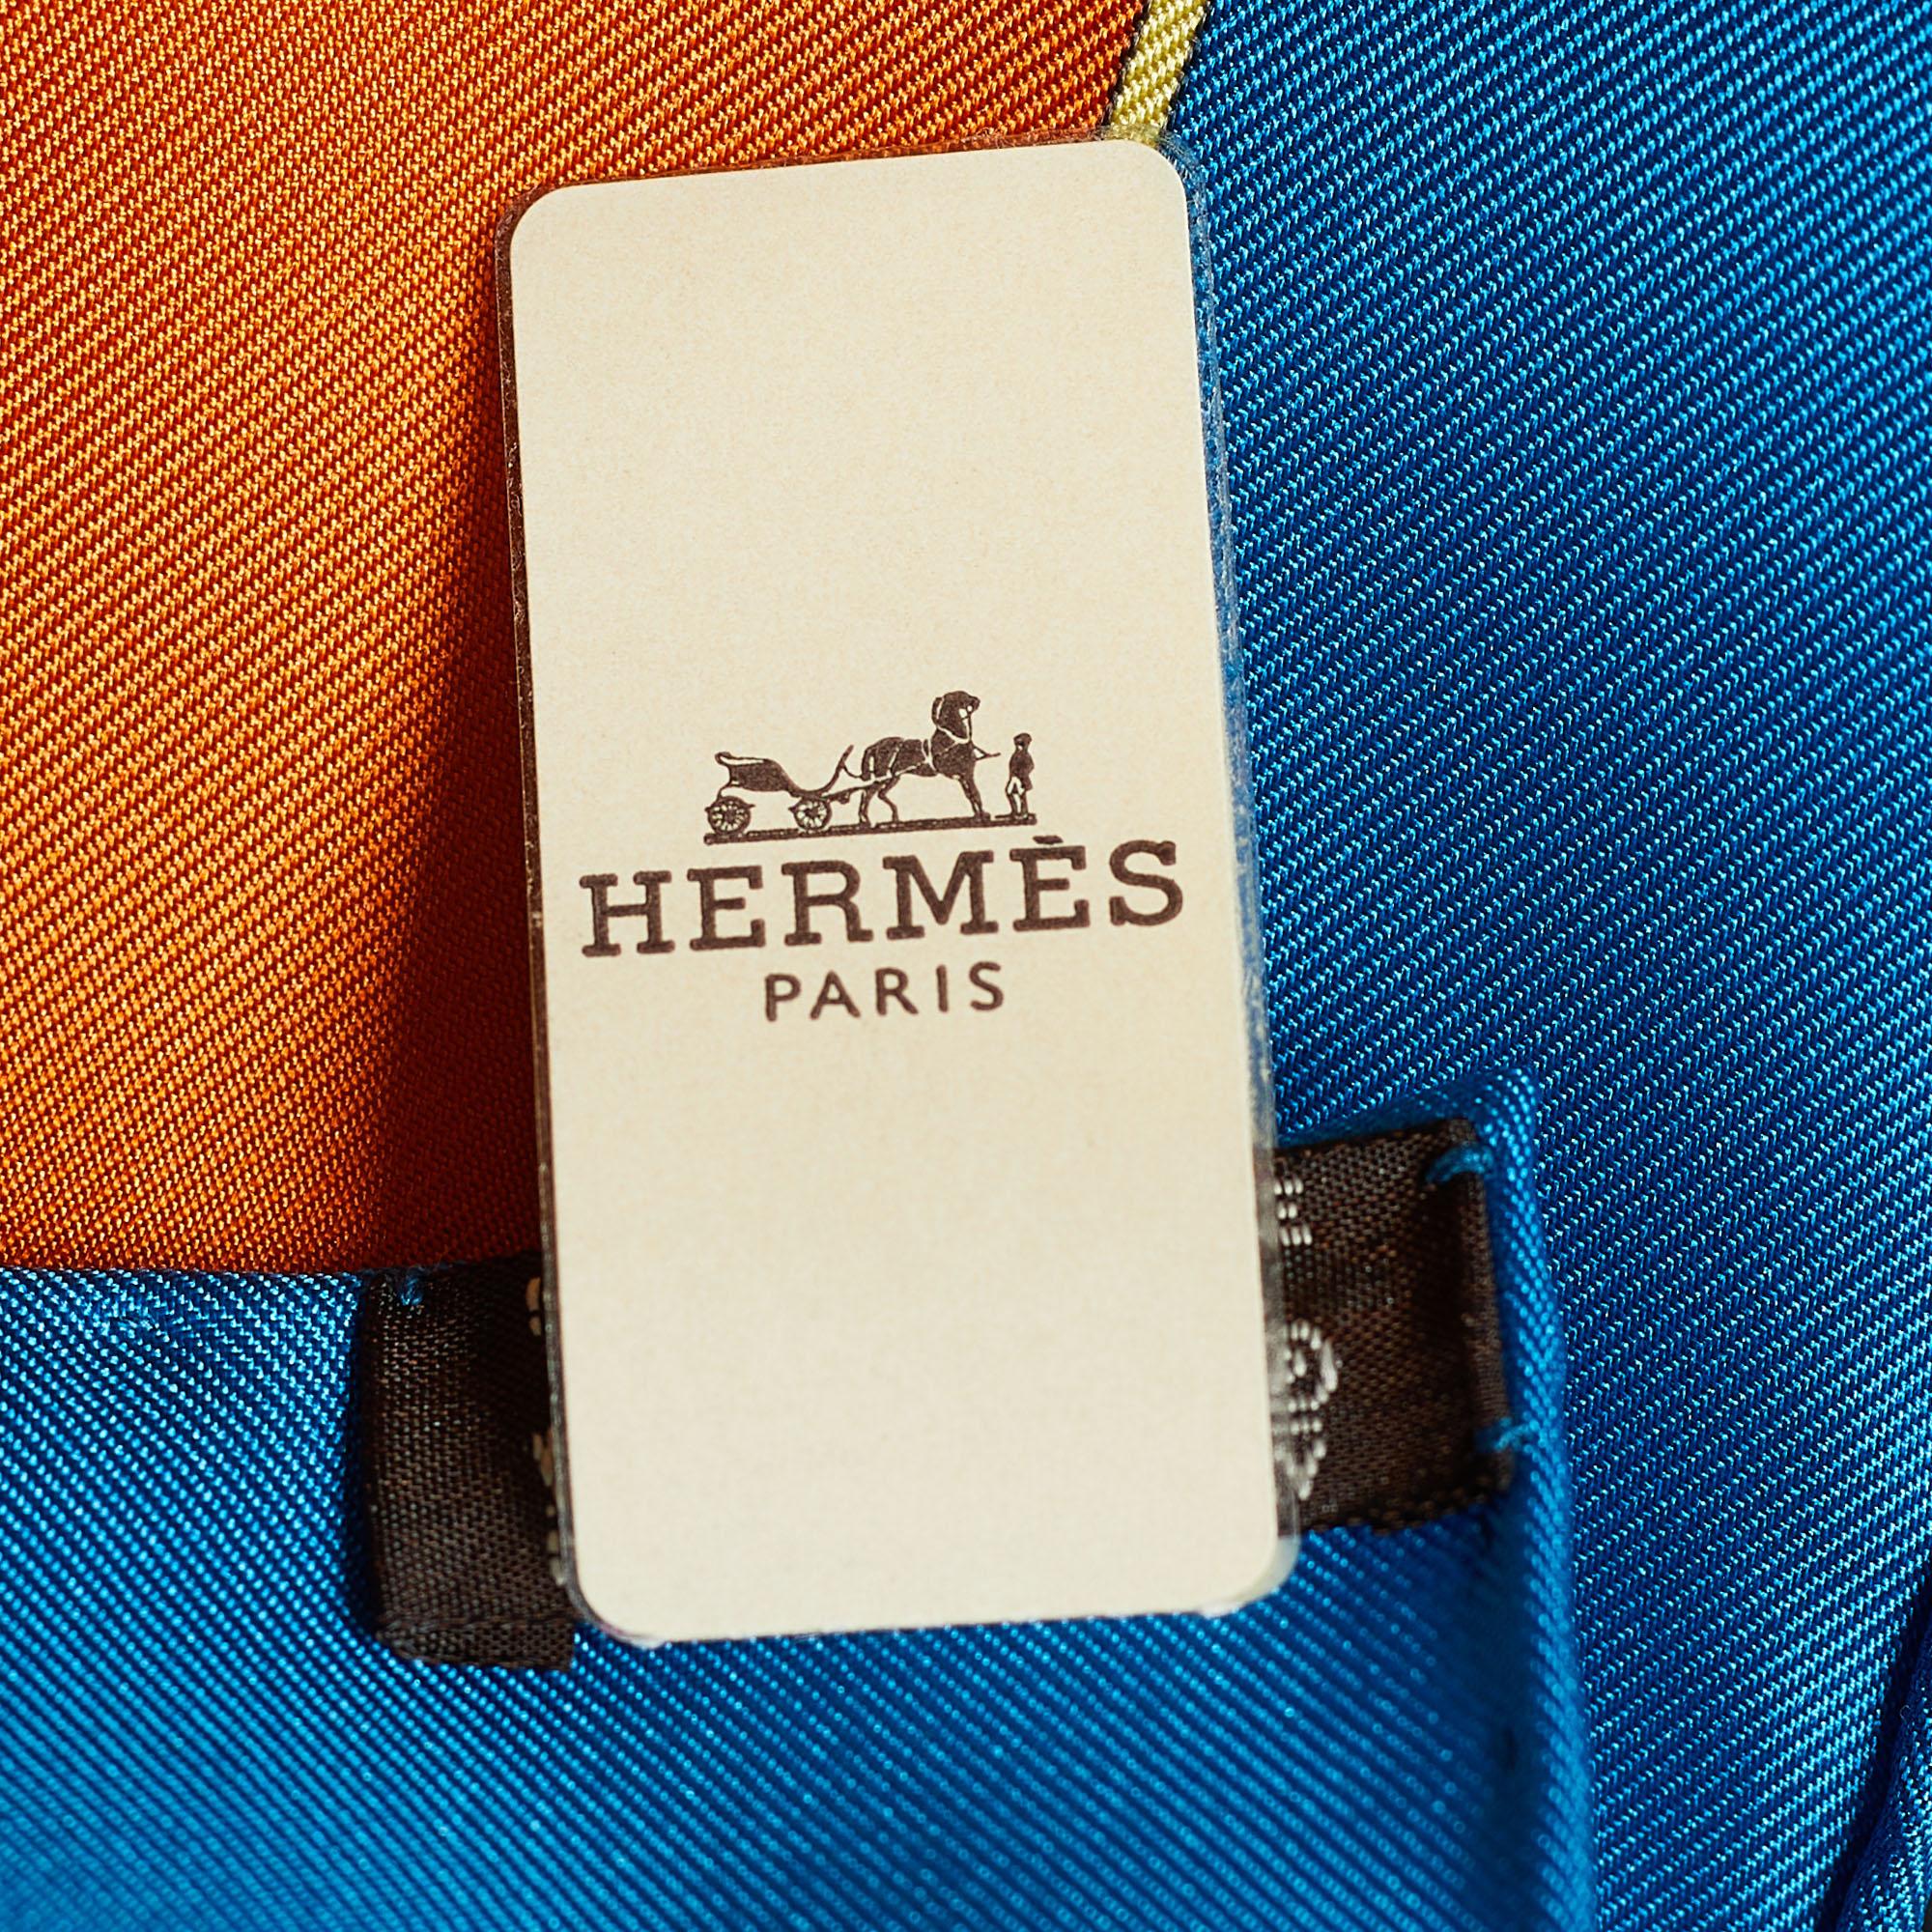 An essential Hermès accessory, the label's scarves are as iconic as any other creation from the brand and are collector's favorites. This rendition is carefully cut from luxurious silk and designed with the La Promenade Du Matin print created by